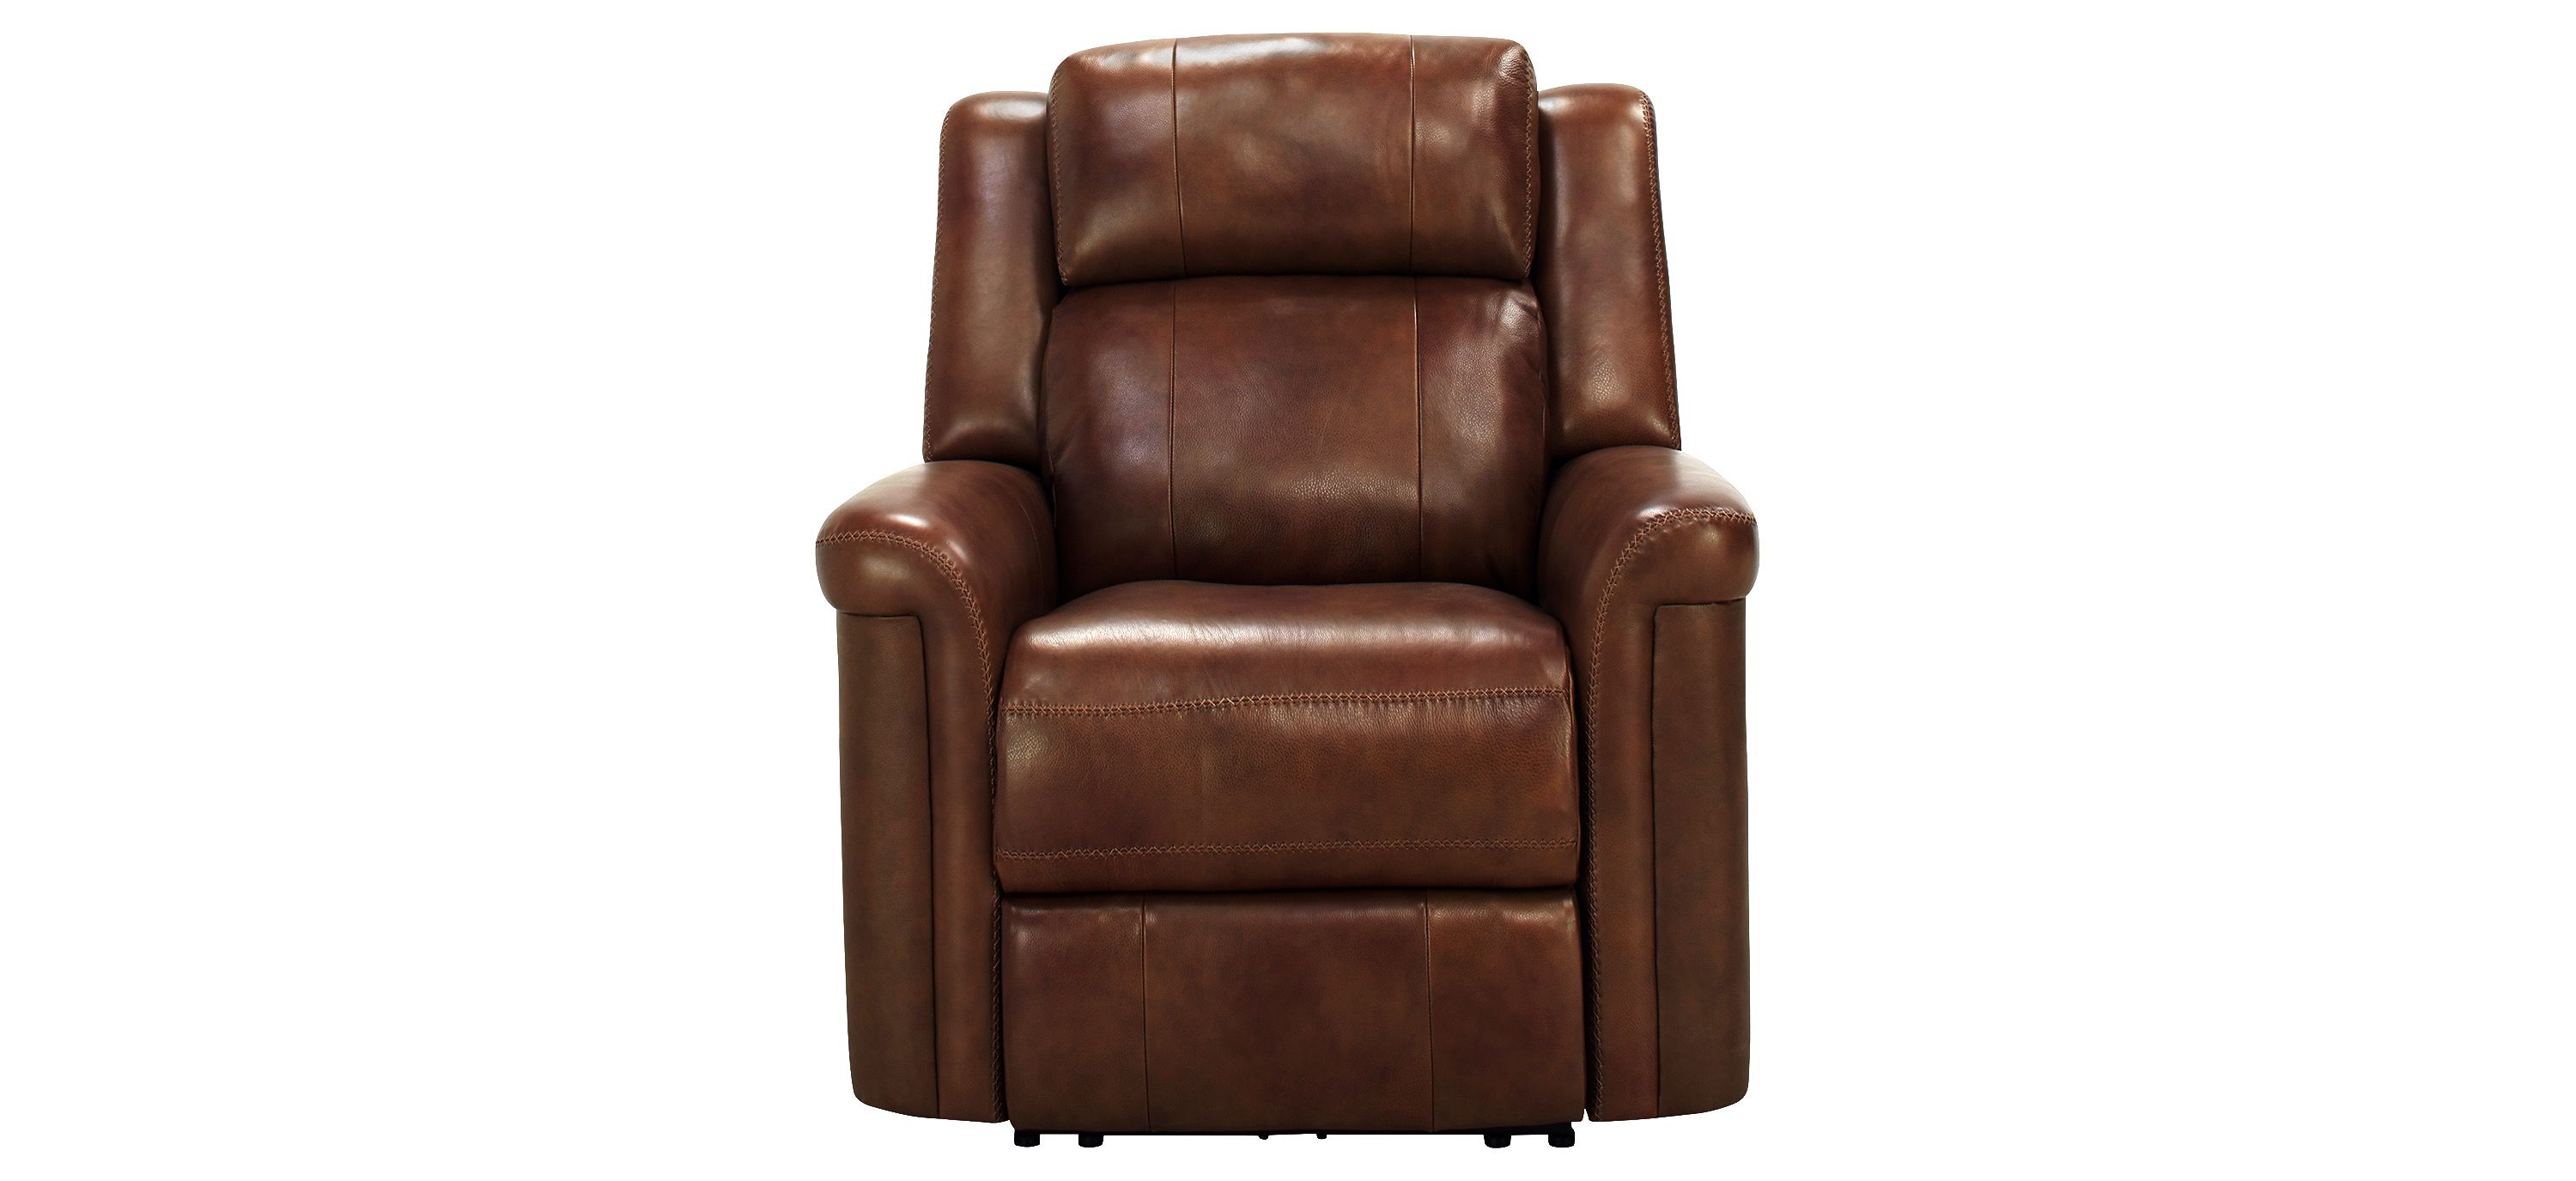 Richfield Leather Power Recliner with Power Headrest and Lumbar